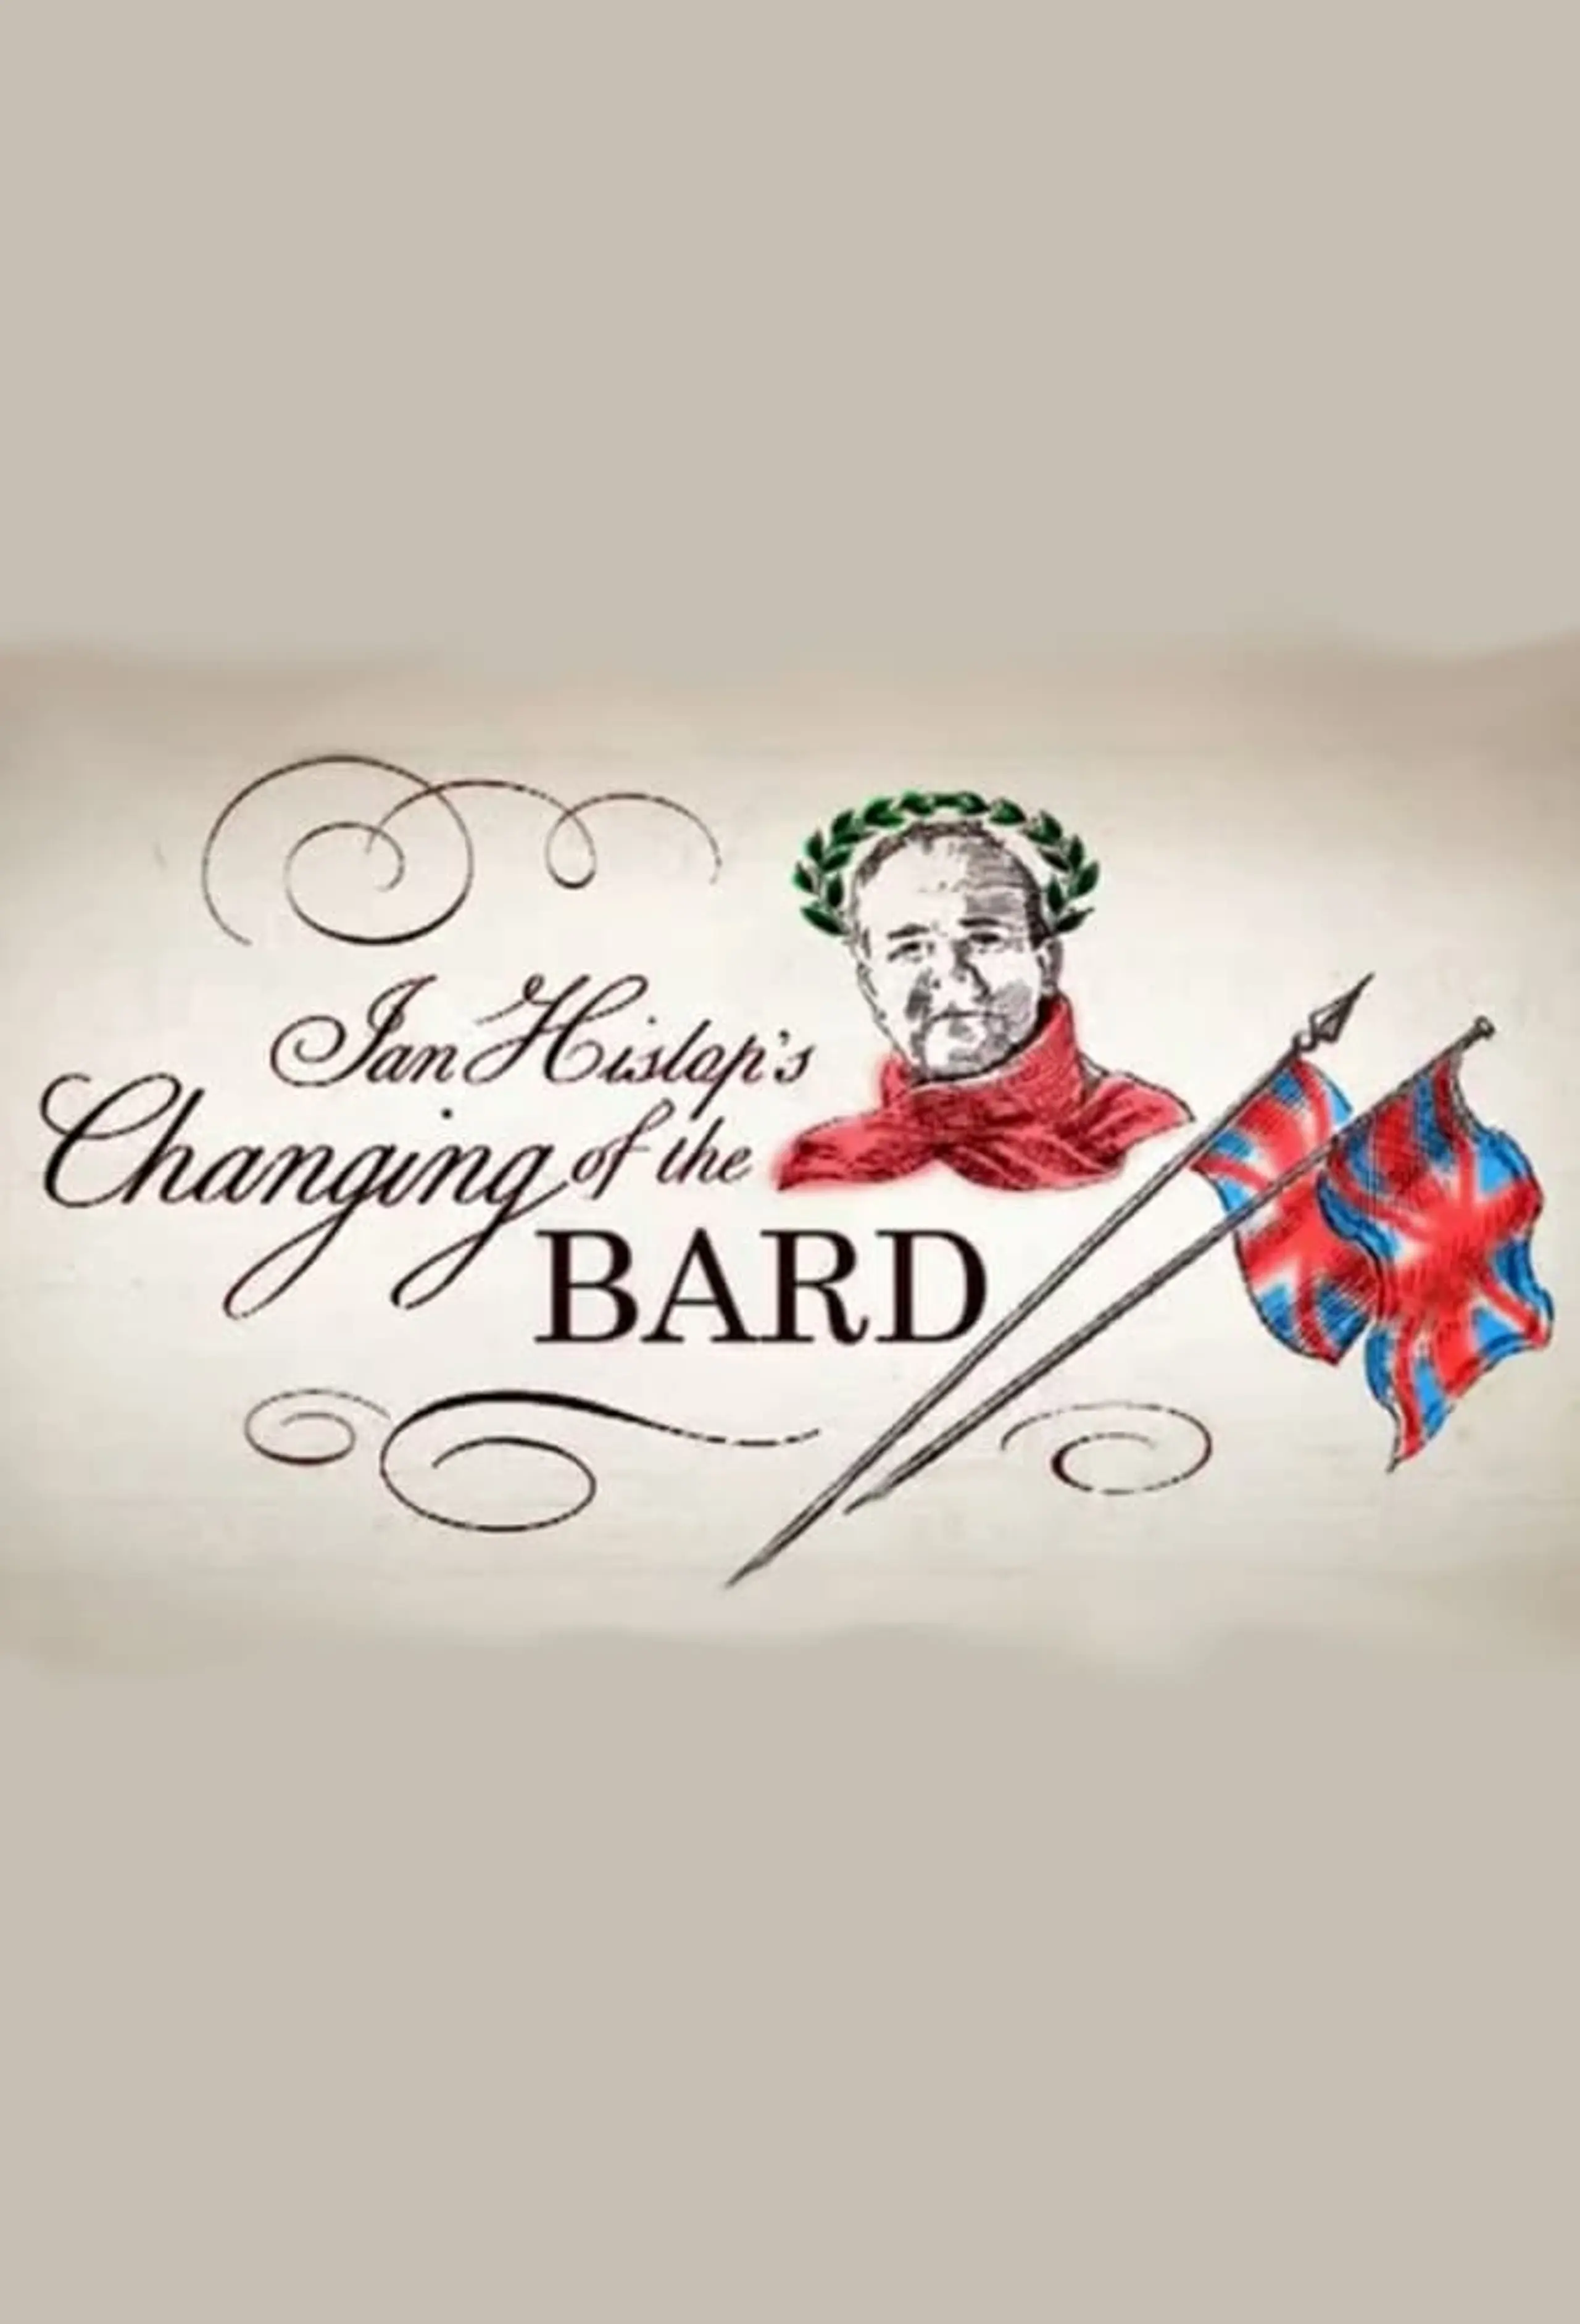 Ian Hislop's Changing of the Bard